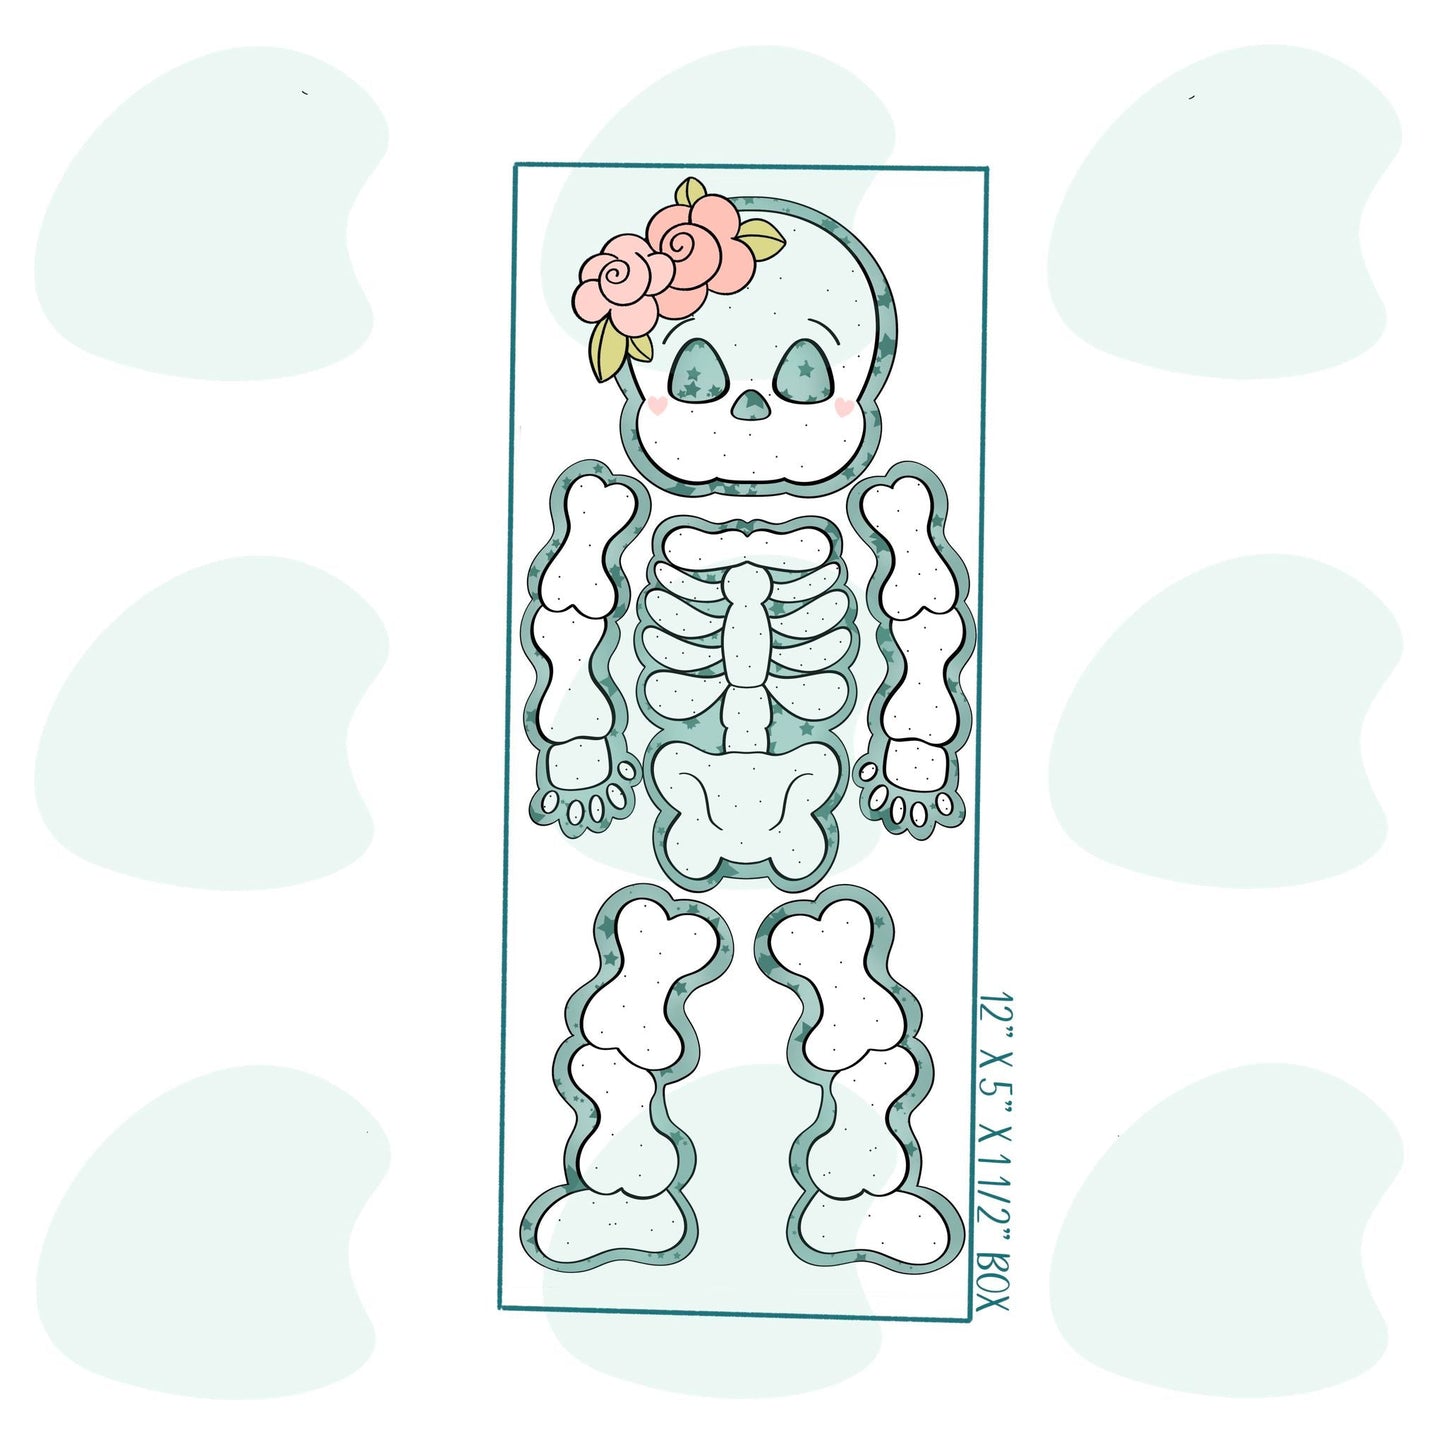 Build-A-Skeleton Set New Sets - Cookie Cutters